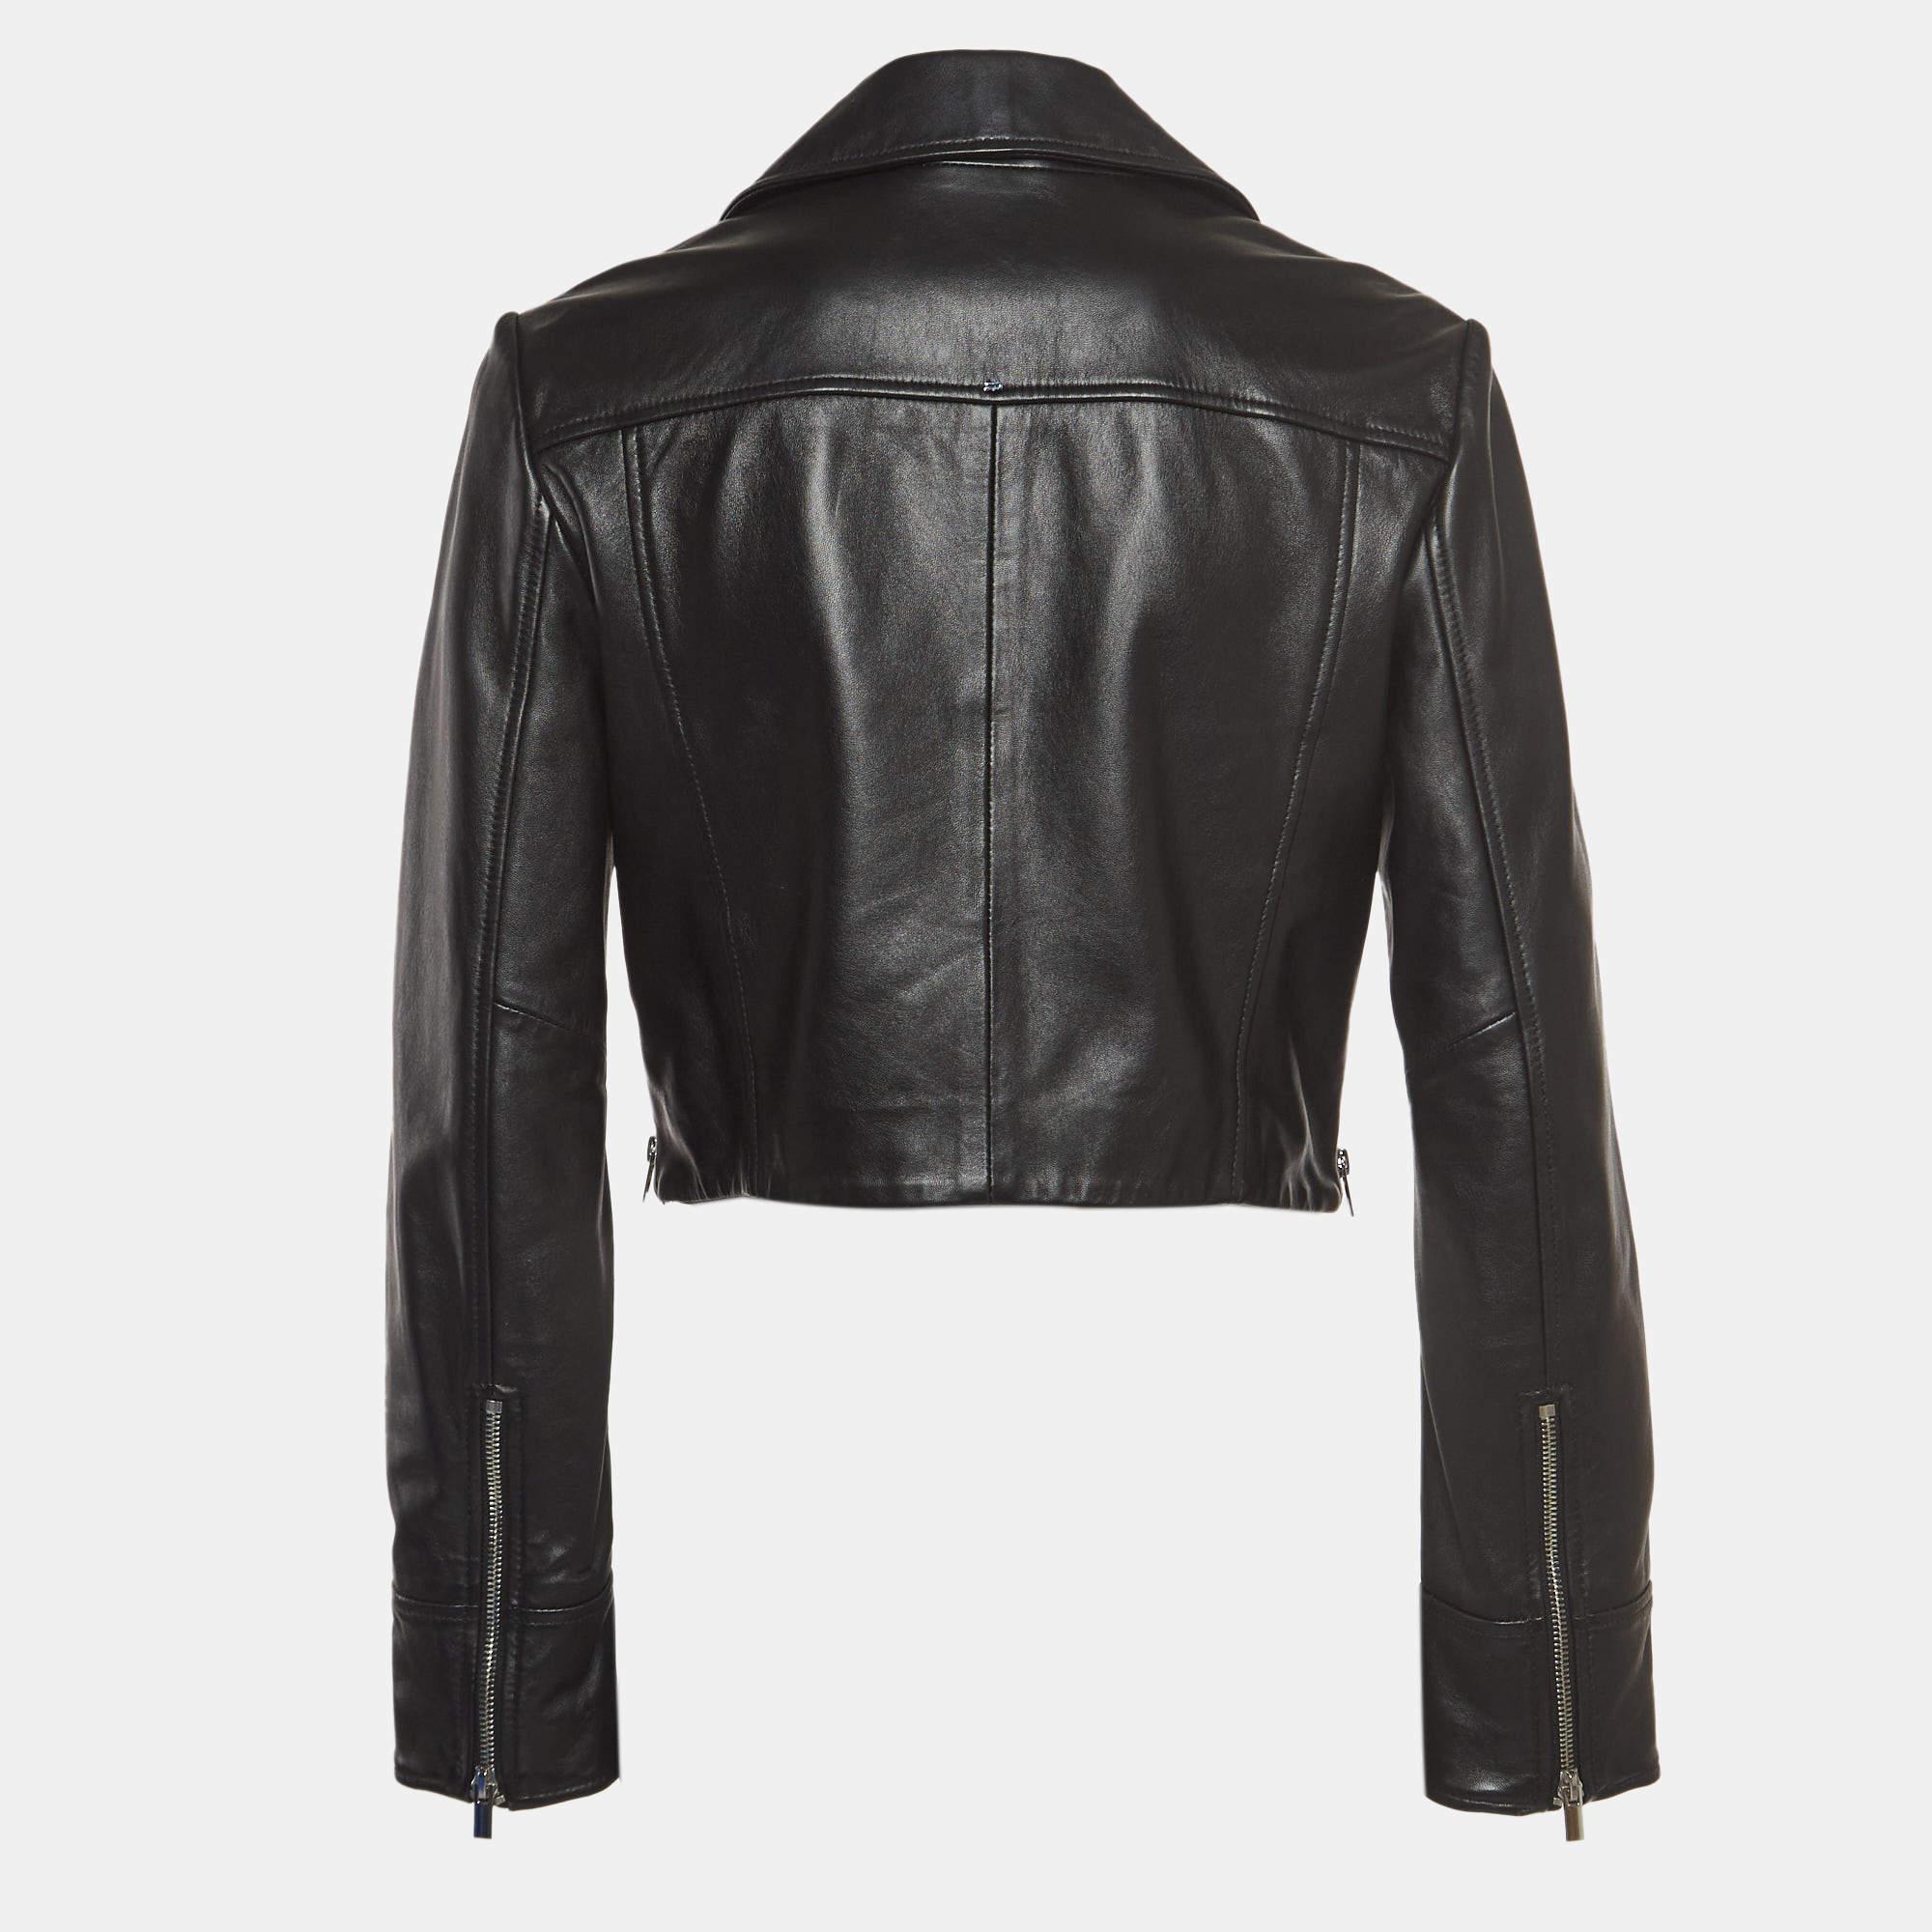 The biker jacket is the epitome of edgy sophistication. Crafted from high-quality leather, this piece features a sleek, tailored silhouette with zip detailing. Its rebellious charm and timeless appeal make it a must-have addition to any